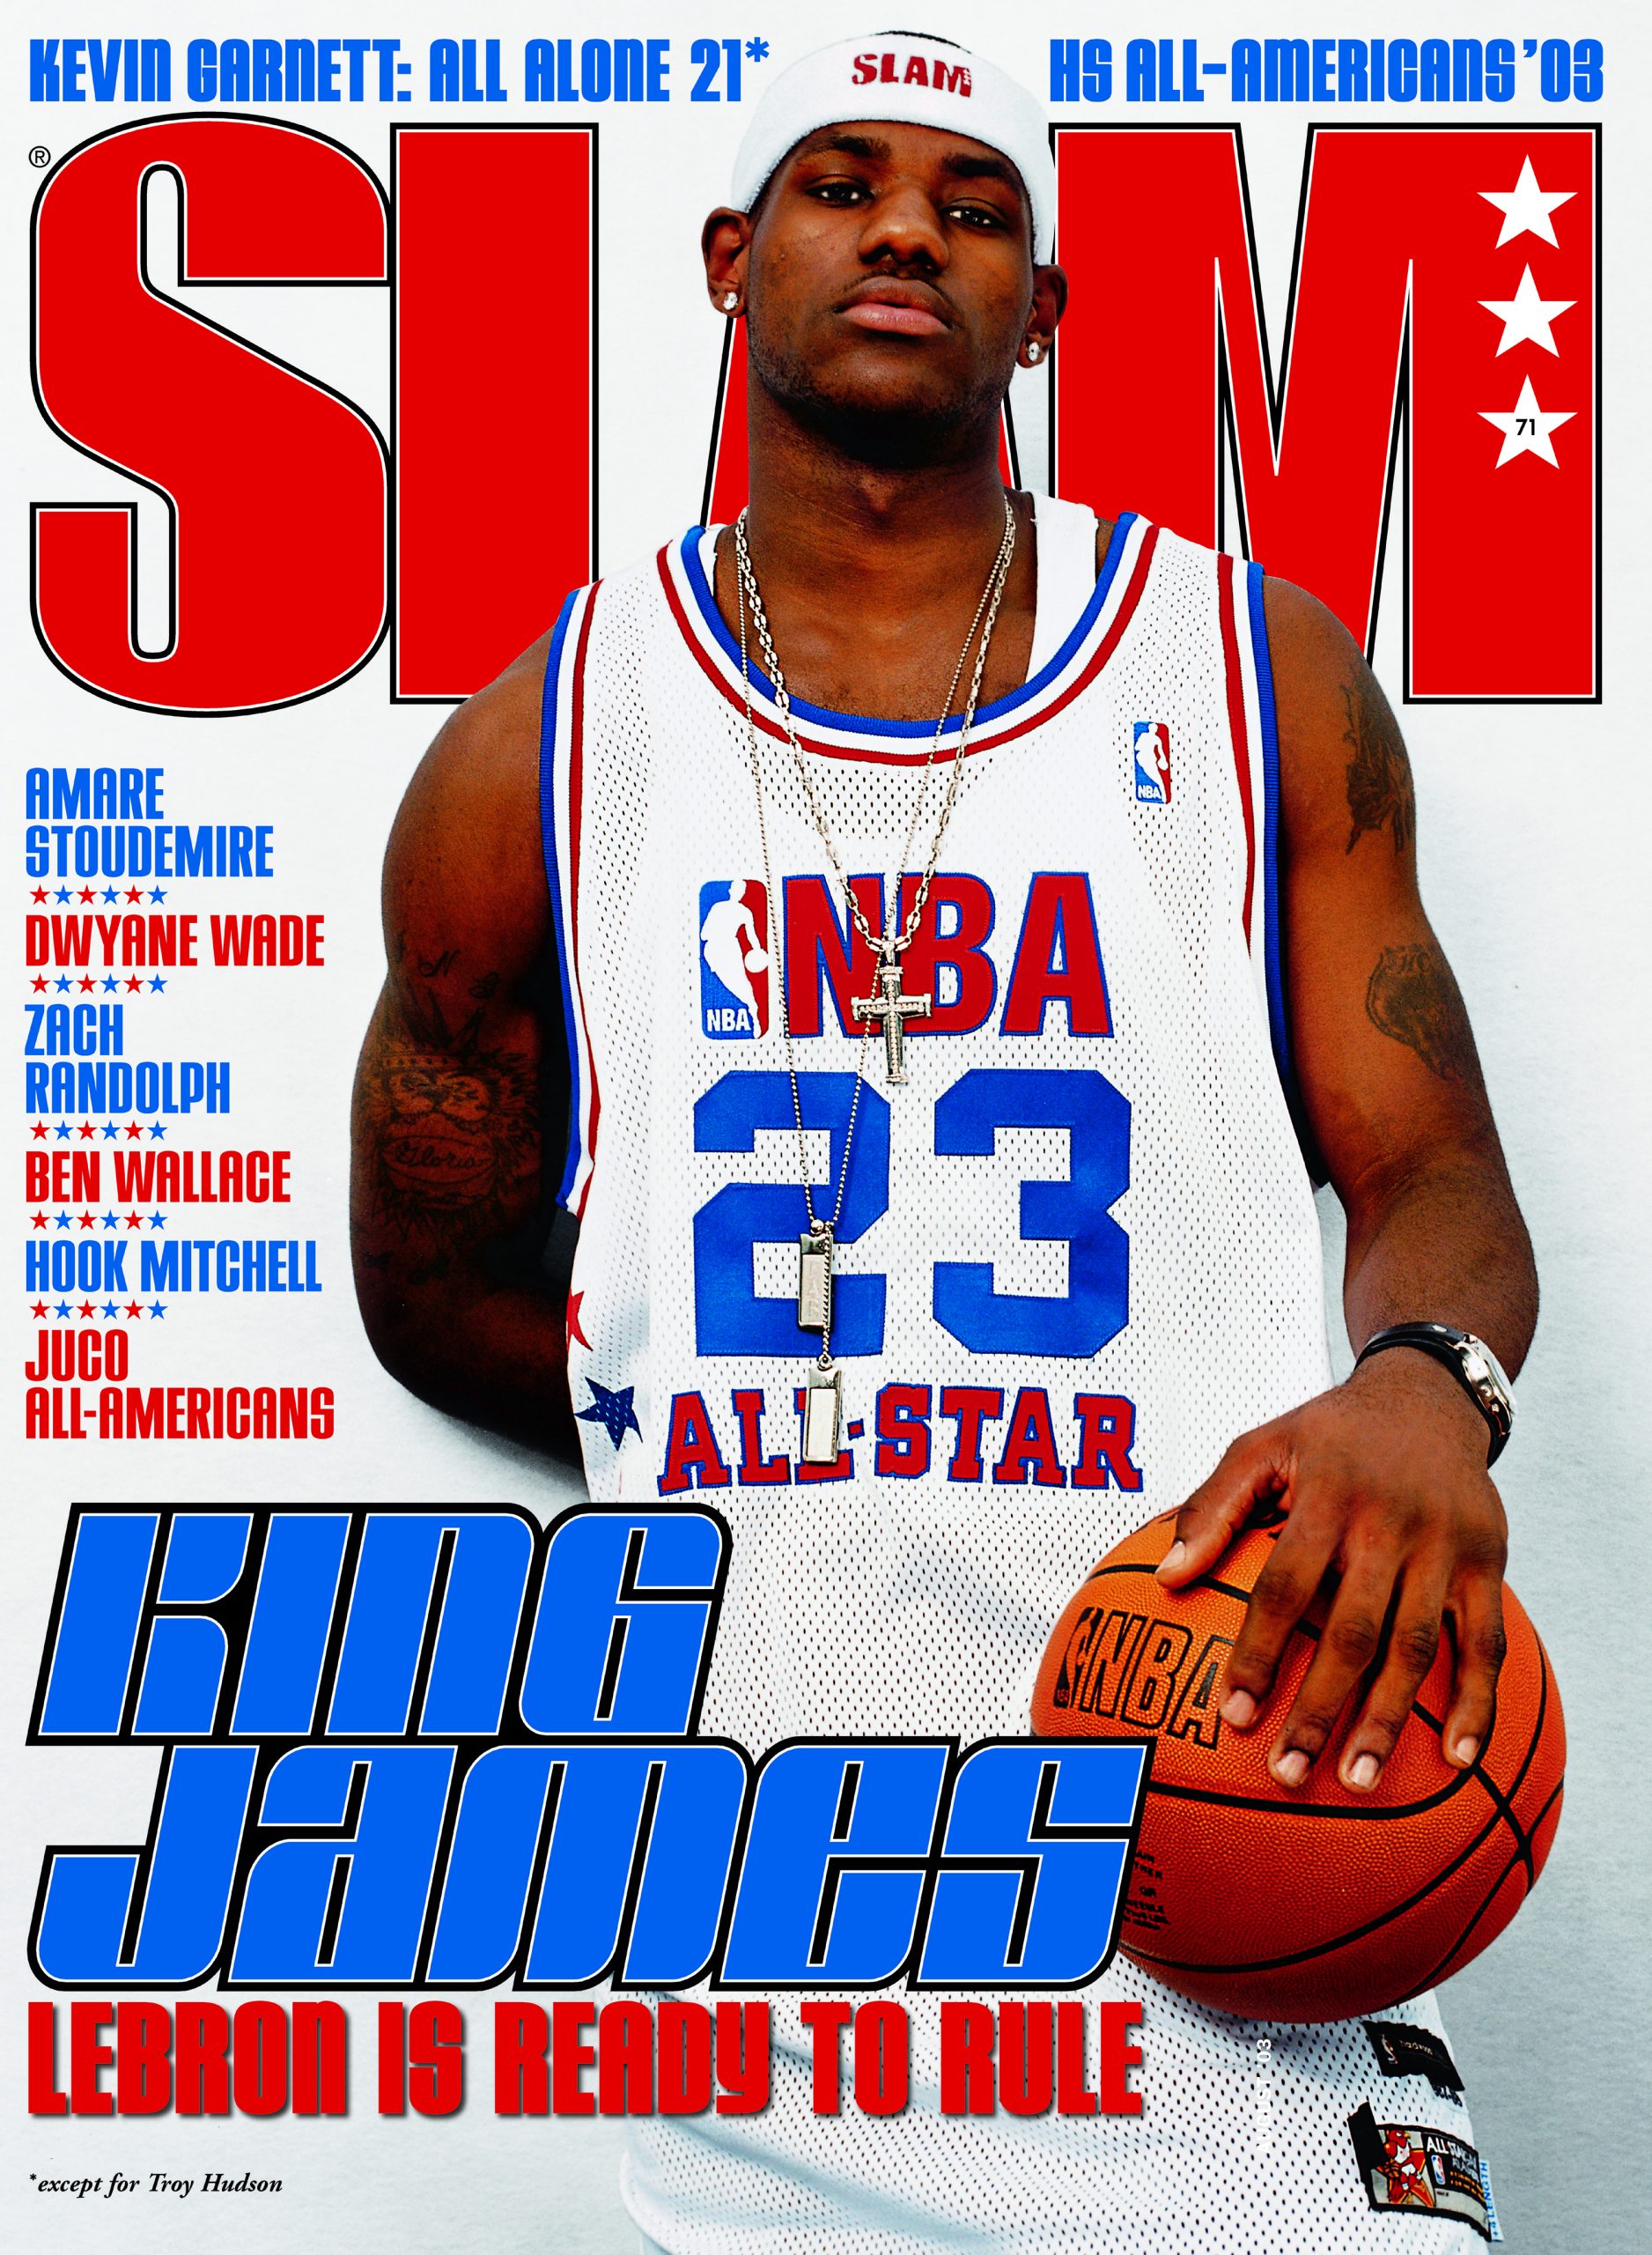 Celebrating the 20th Anniversary of the ’03 NBA Draft and the Arrival of LeBron James